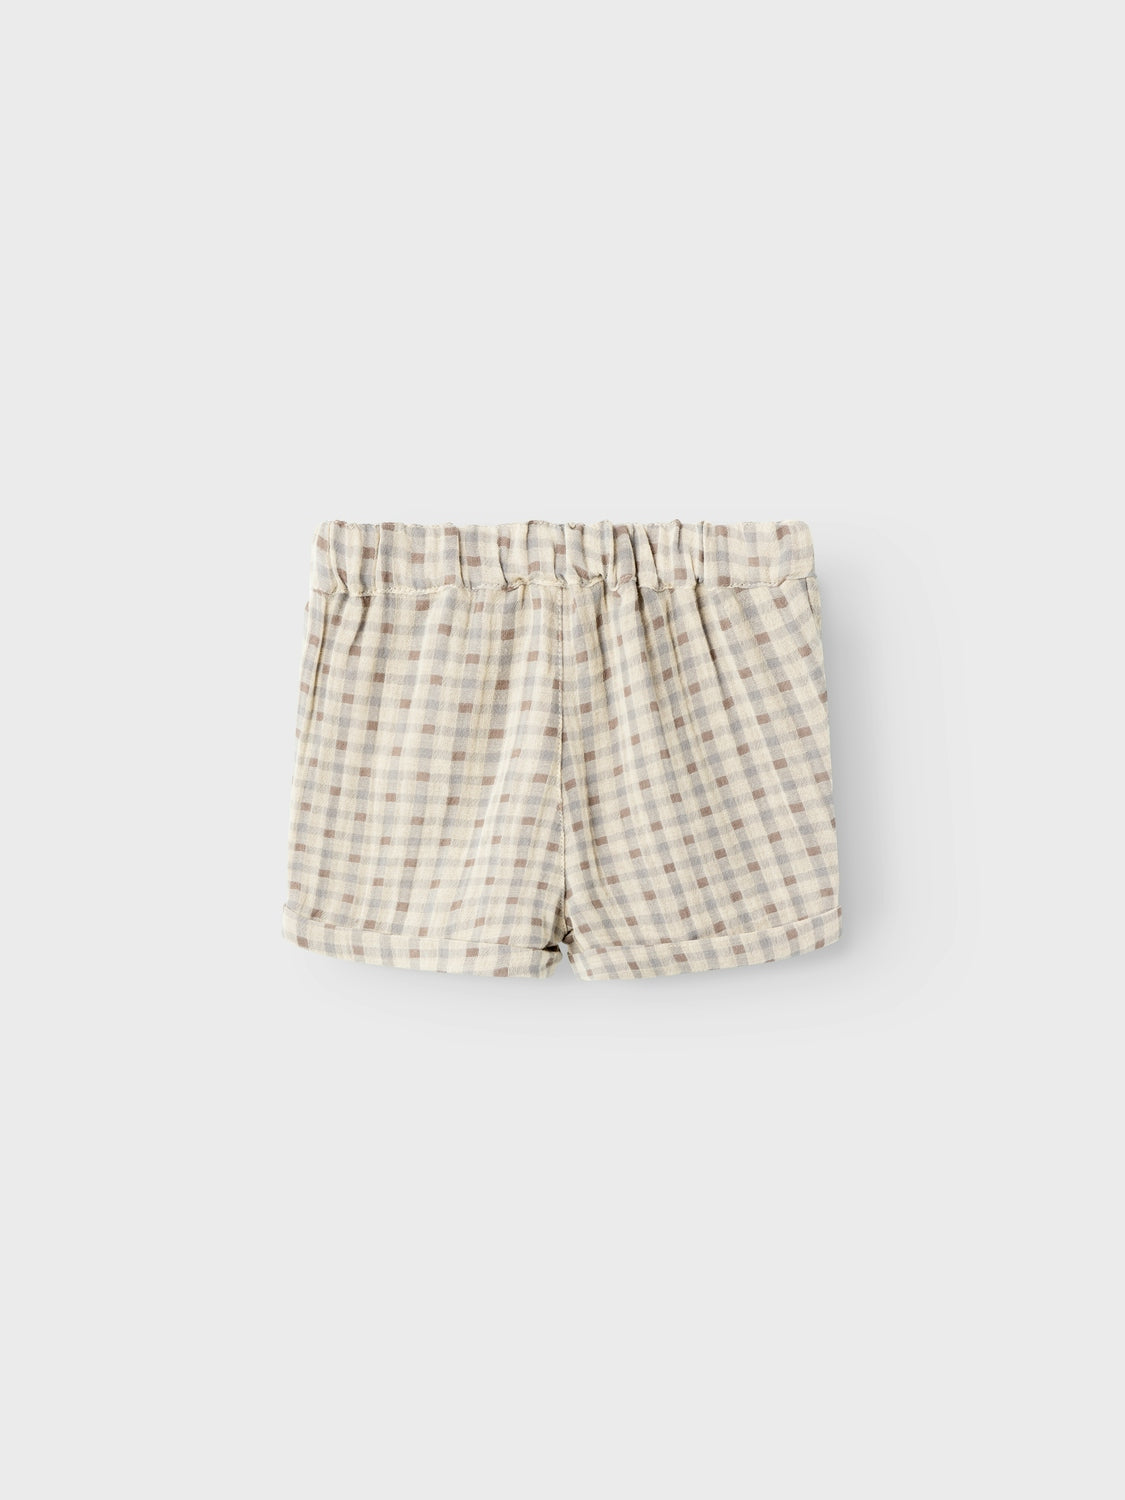 Lil atelier - Joey loose short - Bleached sand